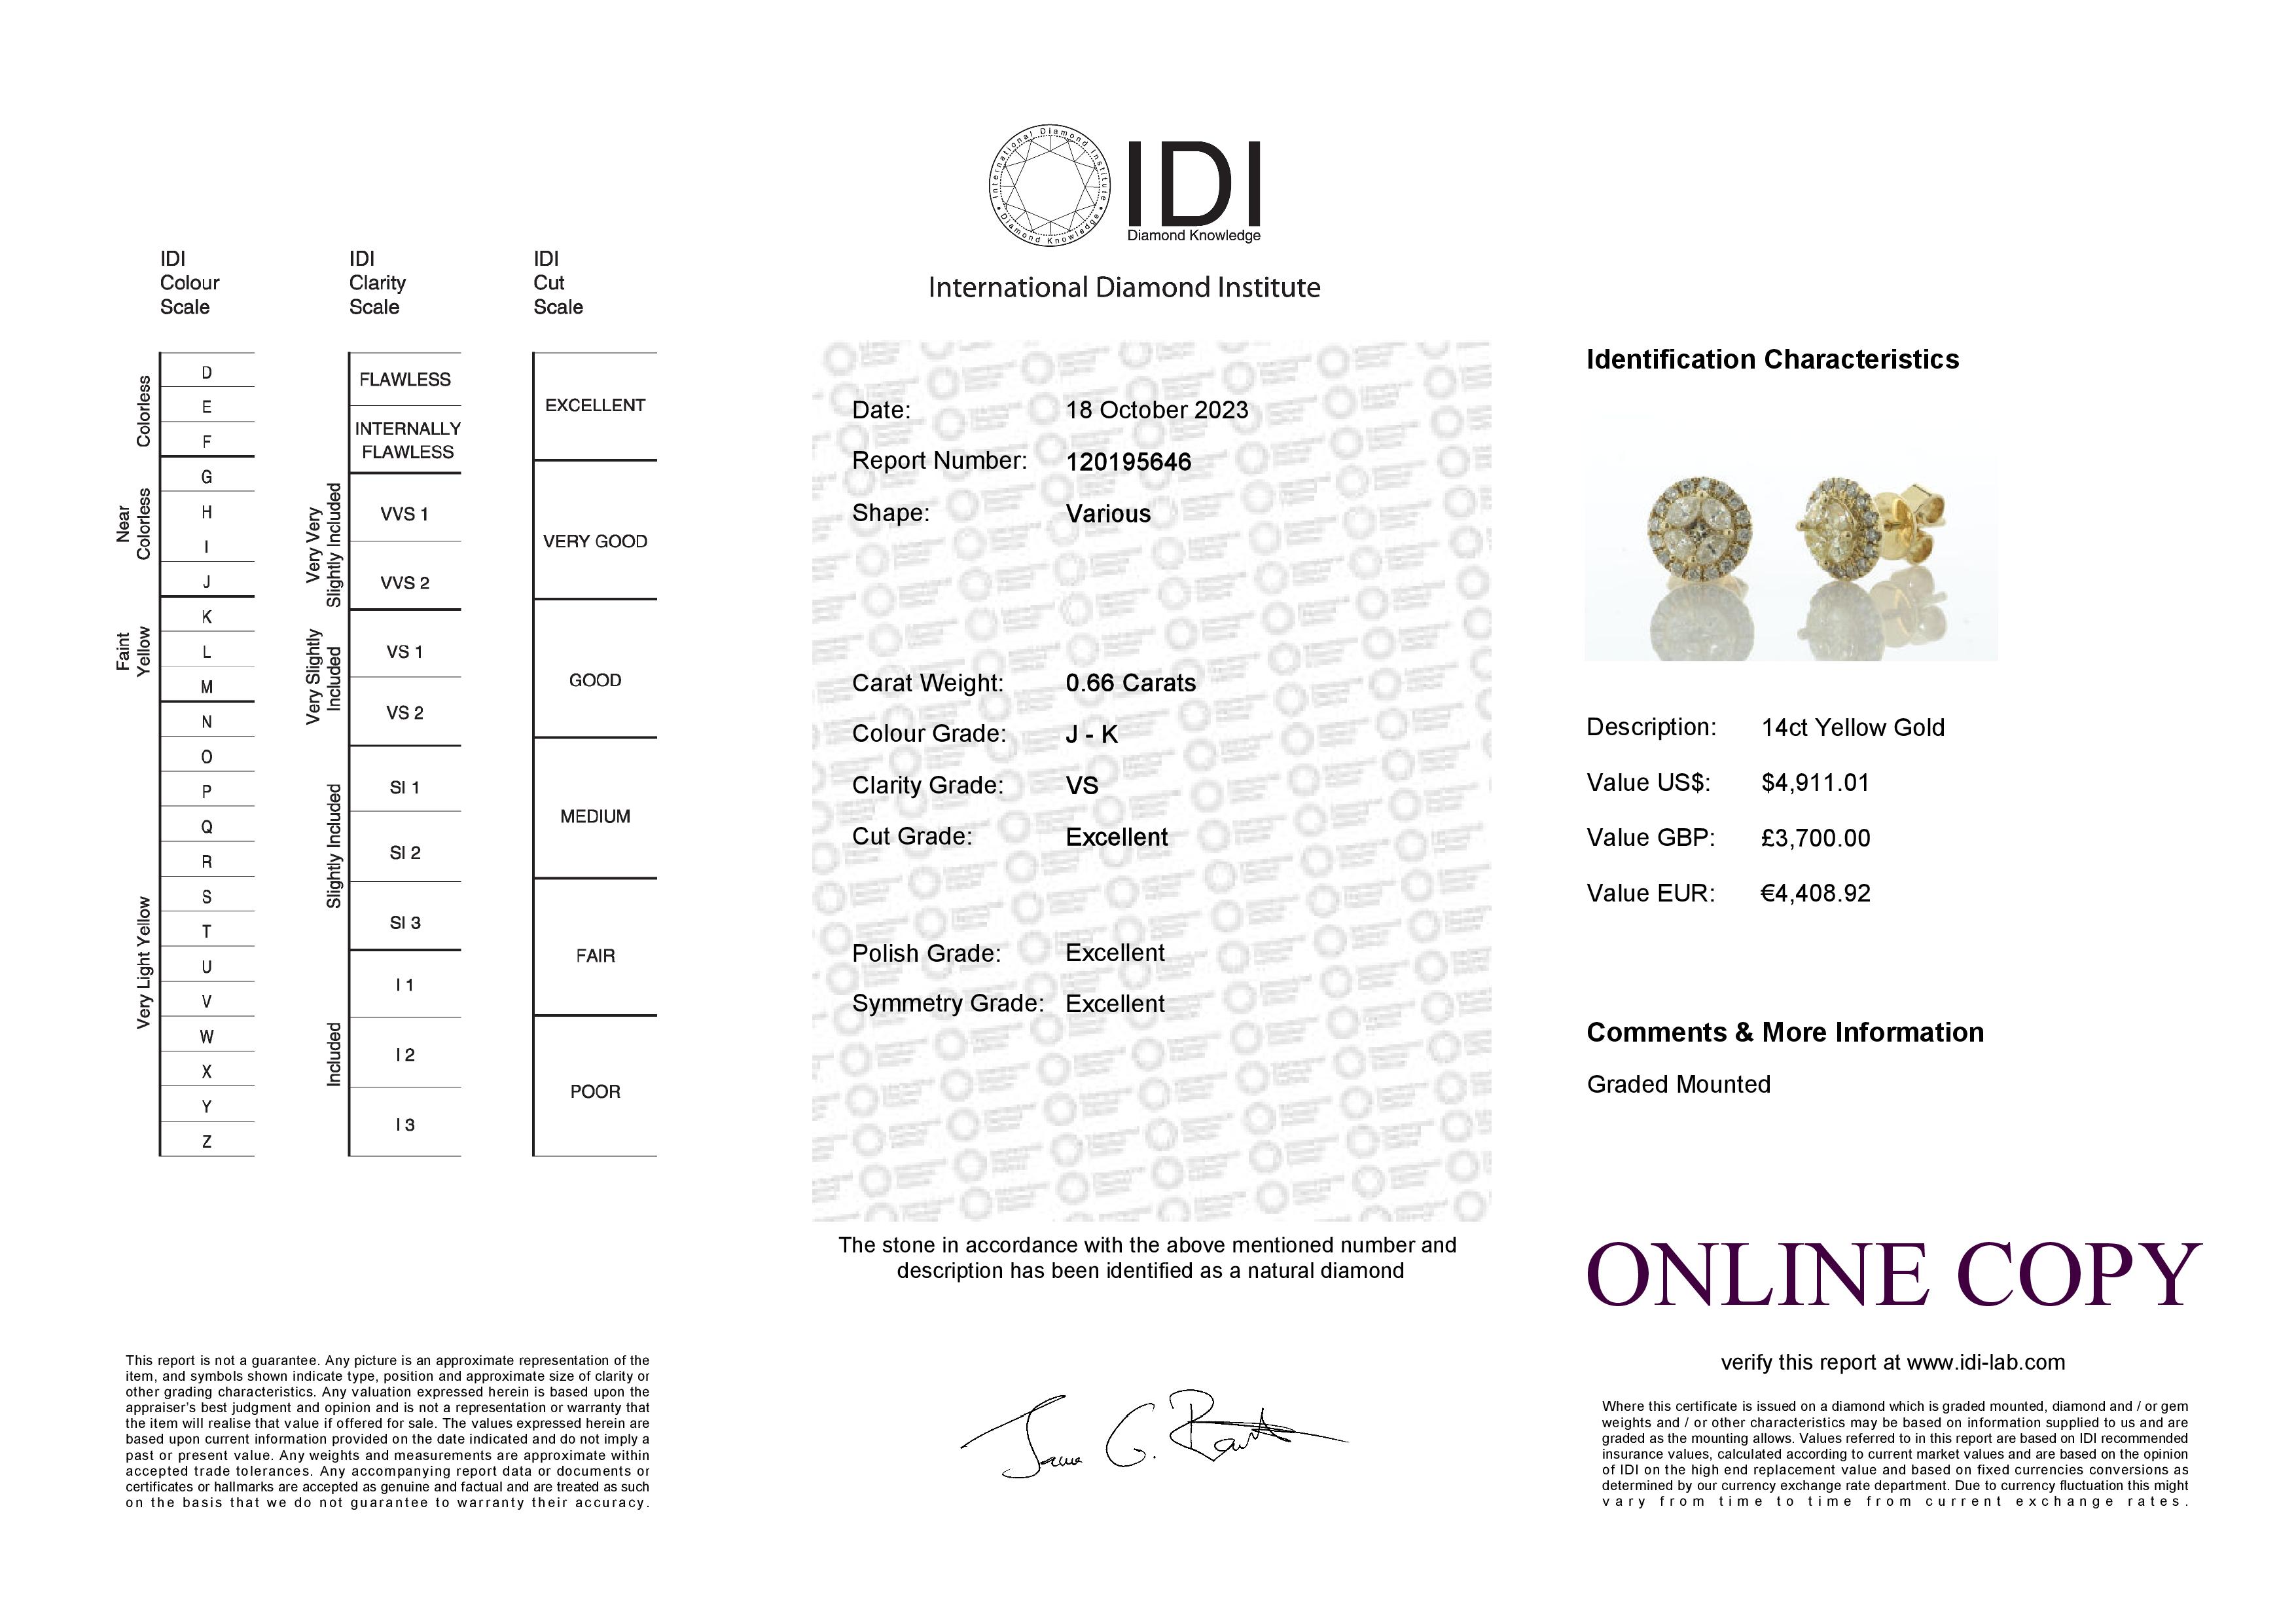 14ct Yellow Gold Cluster Diamond Stud Earring 0.66 Carats - Valued By IDI £3,700.00 - One princess - Image 4 of 4